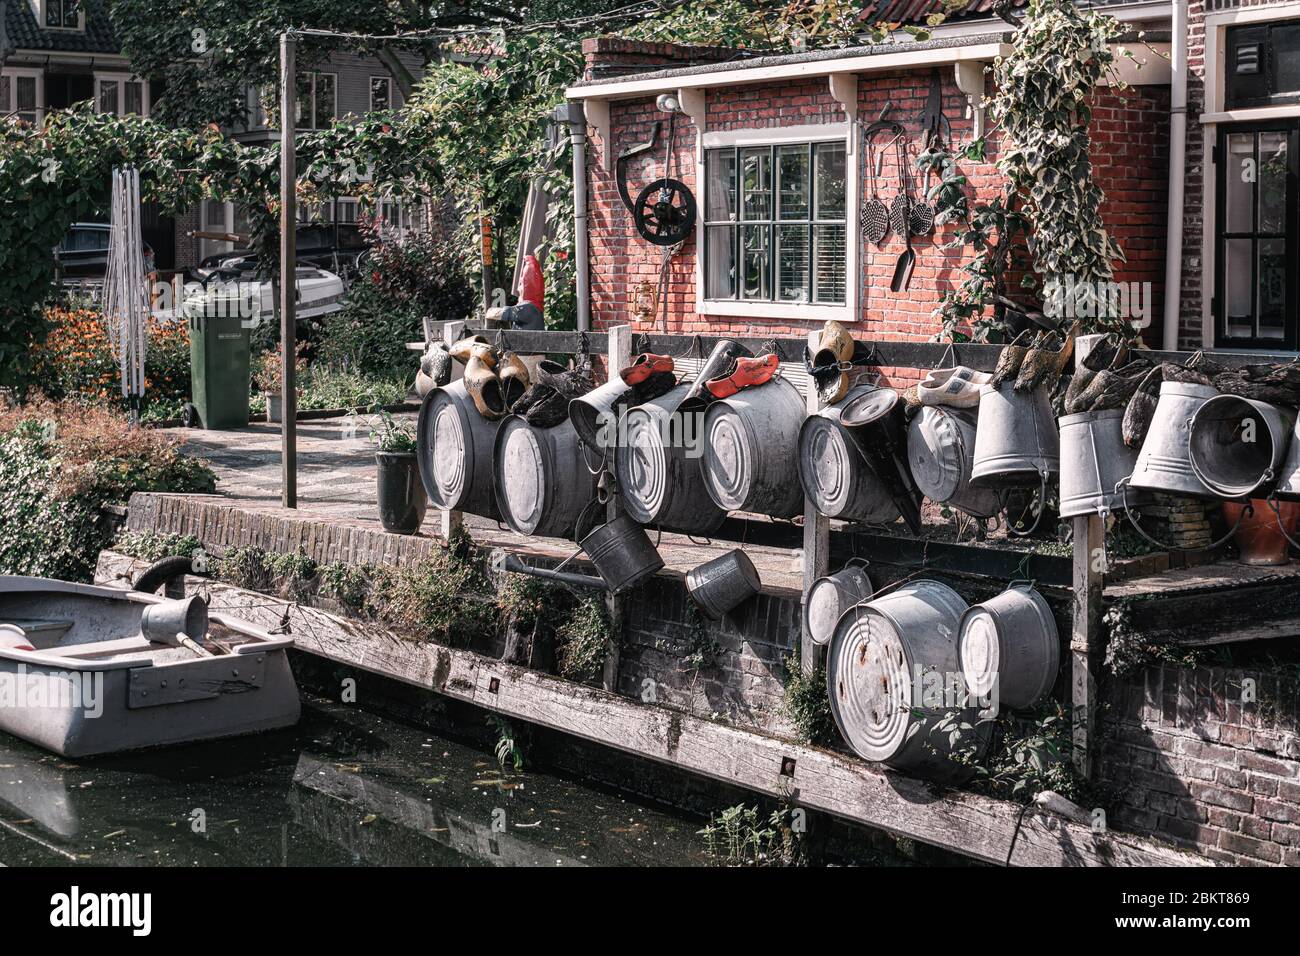 Edam, Netherlands, September 22, 2019:  The backyard at the canal in Edam decorated with zinc tubs, watering can and wooden clogs Stock Photo